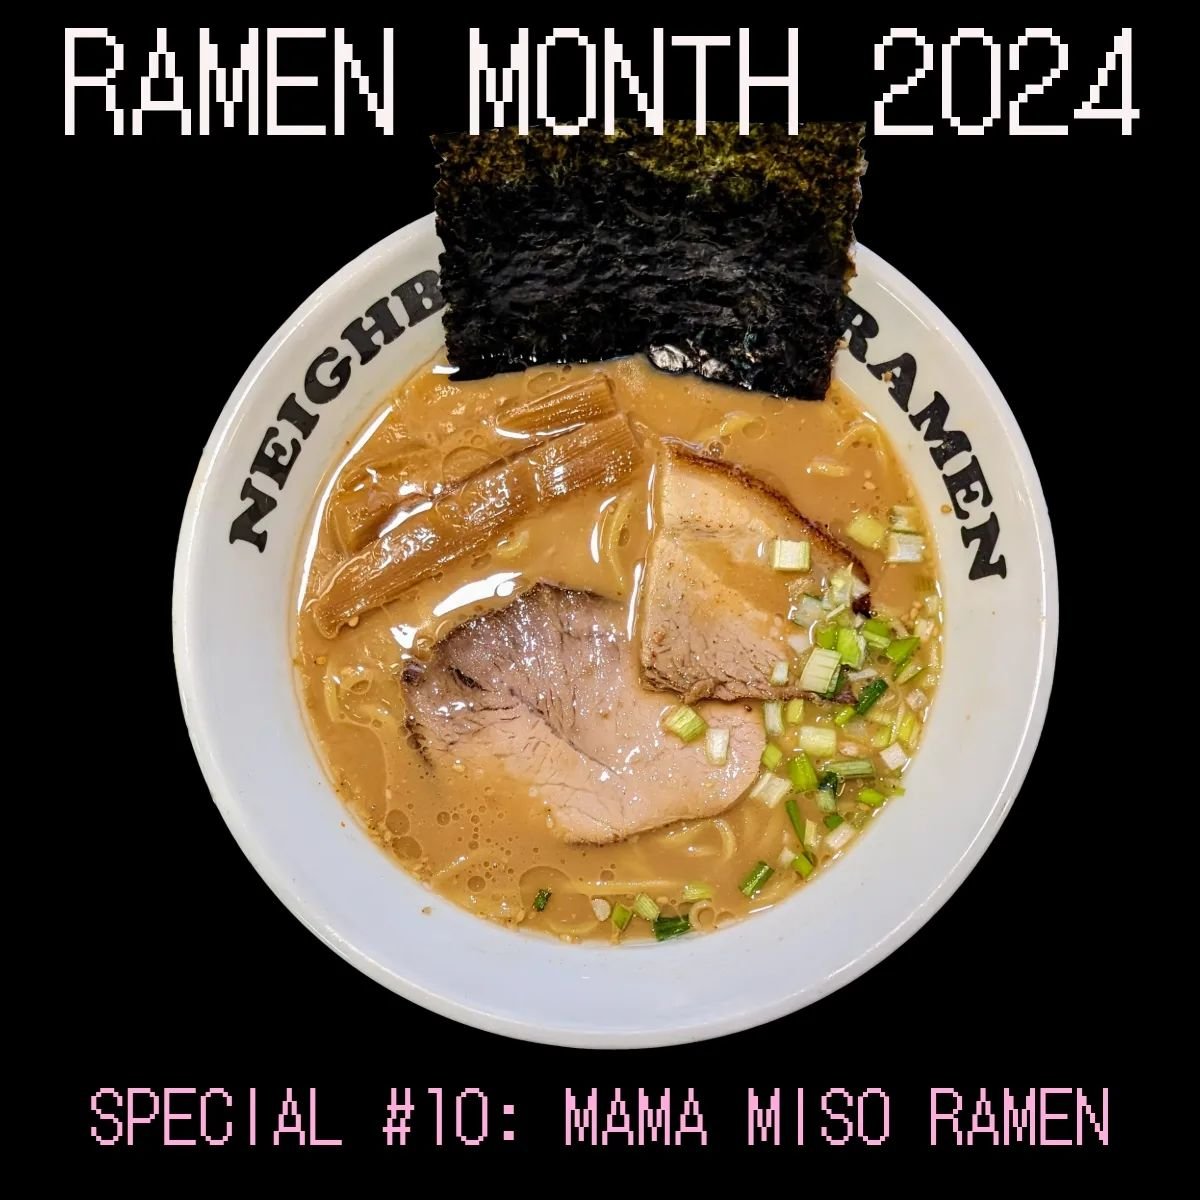 For the 4th special of Miso Mondays in April, which was Special #10 of #ramenmonth, we brought back Mama Miso

A comforting bowl of tonkotsu with tare made with 3 misos &amp; sake lees, pork shoulder and belly, menma, negi and nori. 
Inspired by the 